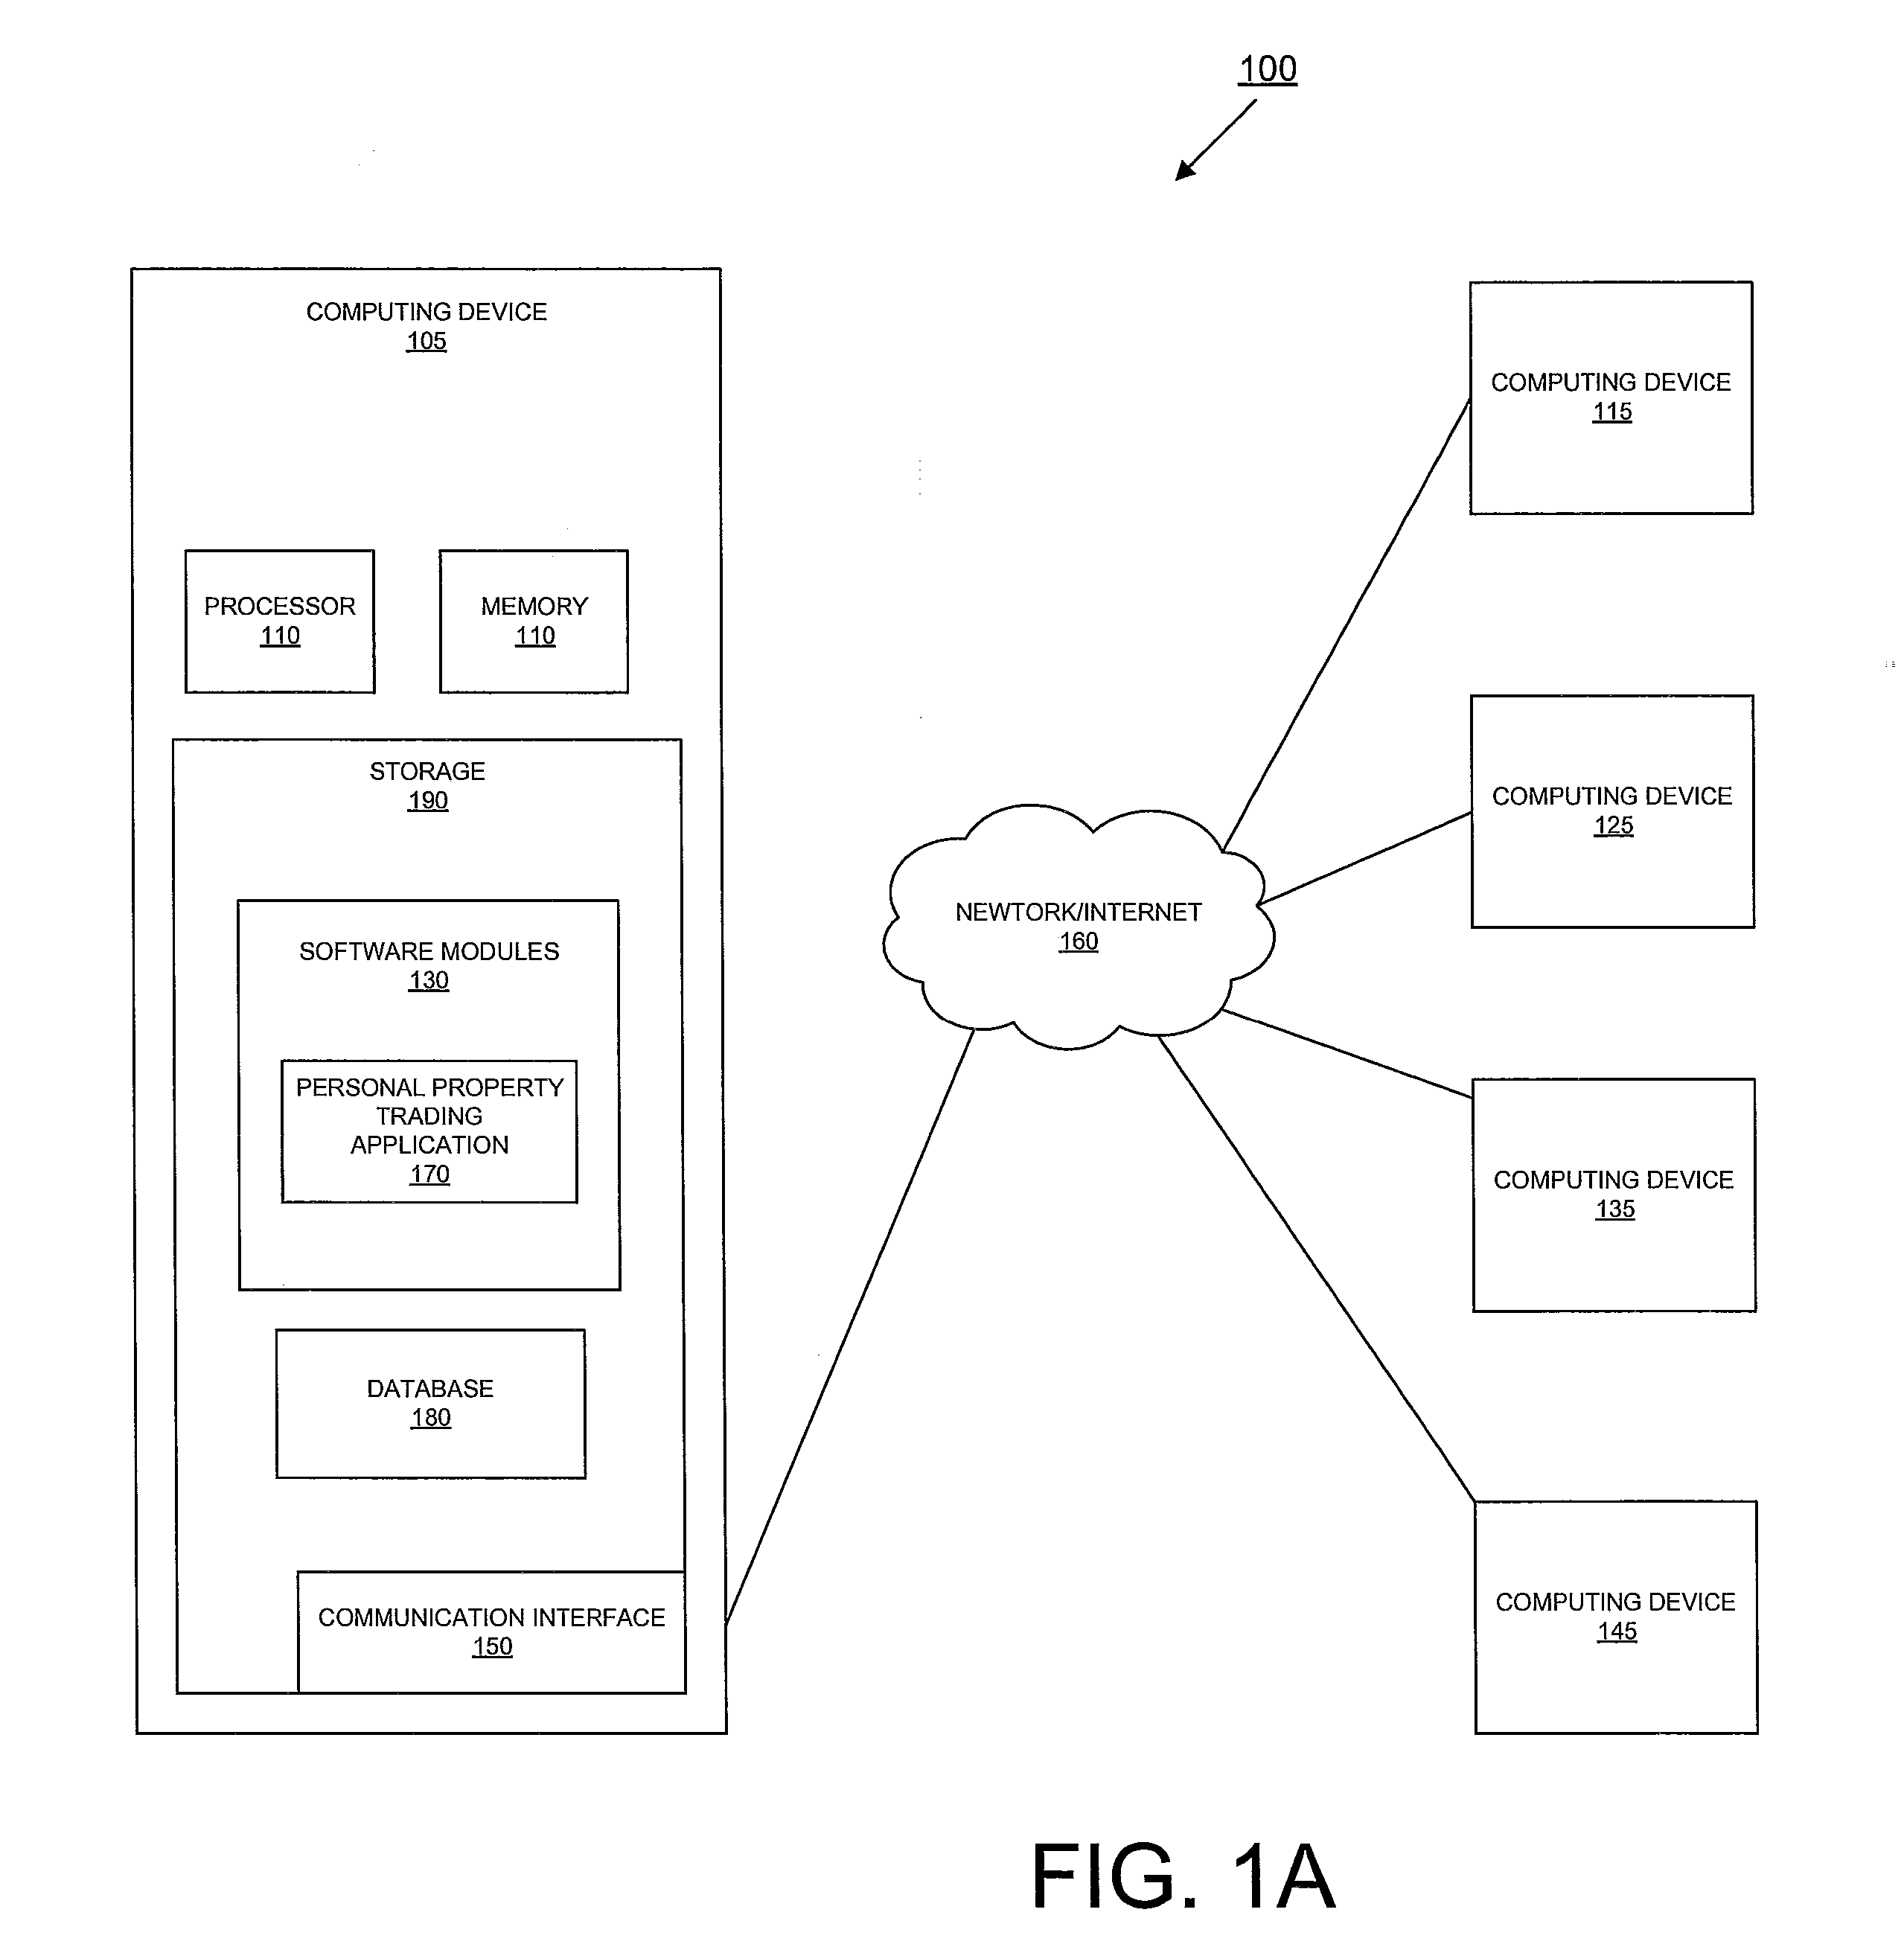 Systems and methods for a website application for the purpose of trading, bartering, swapping, or exchanging personal property through a social networking environment